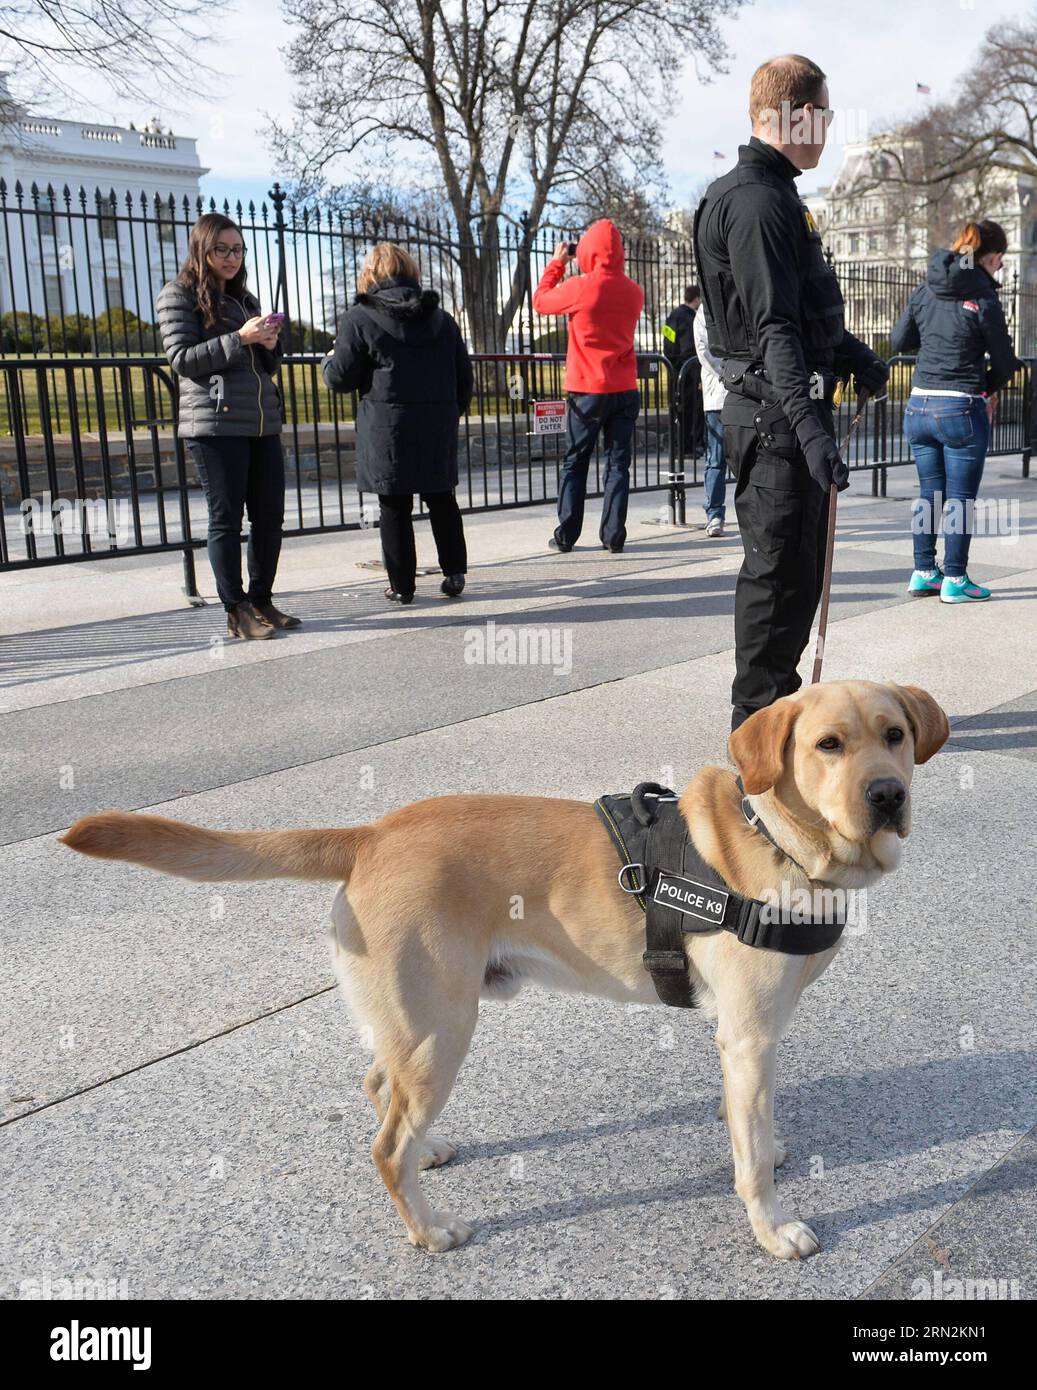 (150313) -- WASHINGTON D.C., March 13, 2015 -- Police dog patrols around the White House in Washington D.C., capital of the United States, March 13, 2015. For a U.S. federal agency with a name that suggests secrecy, putting itself repeatedly in the limelight for negative news coverage is quite a bitter irony. The Secret Service, widely perceived as the most elite law enforcement team in the United States that protects the U.S. president and the First Family, landed itself in hot water again after U.S. media revealed earlier this week that two top Secret Service barreled through a scene of an a Stock Photo